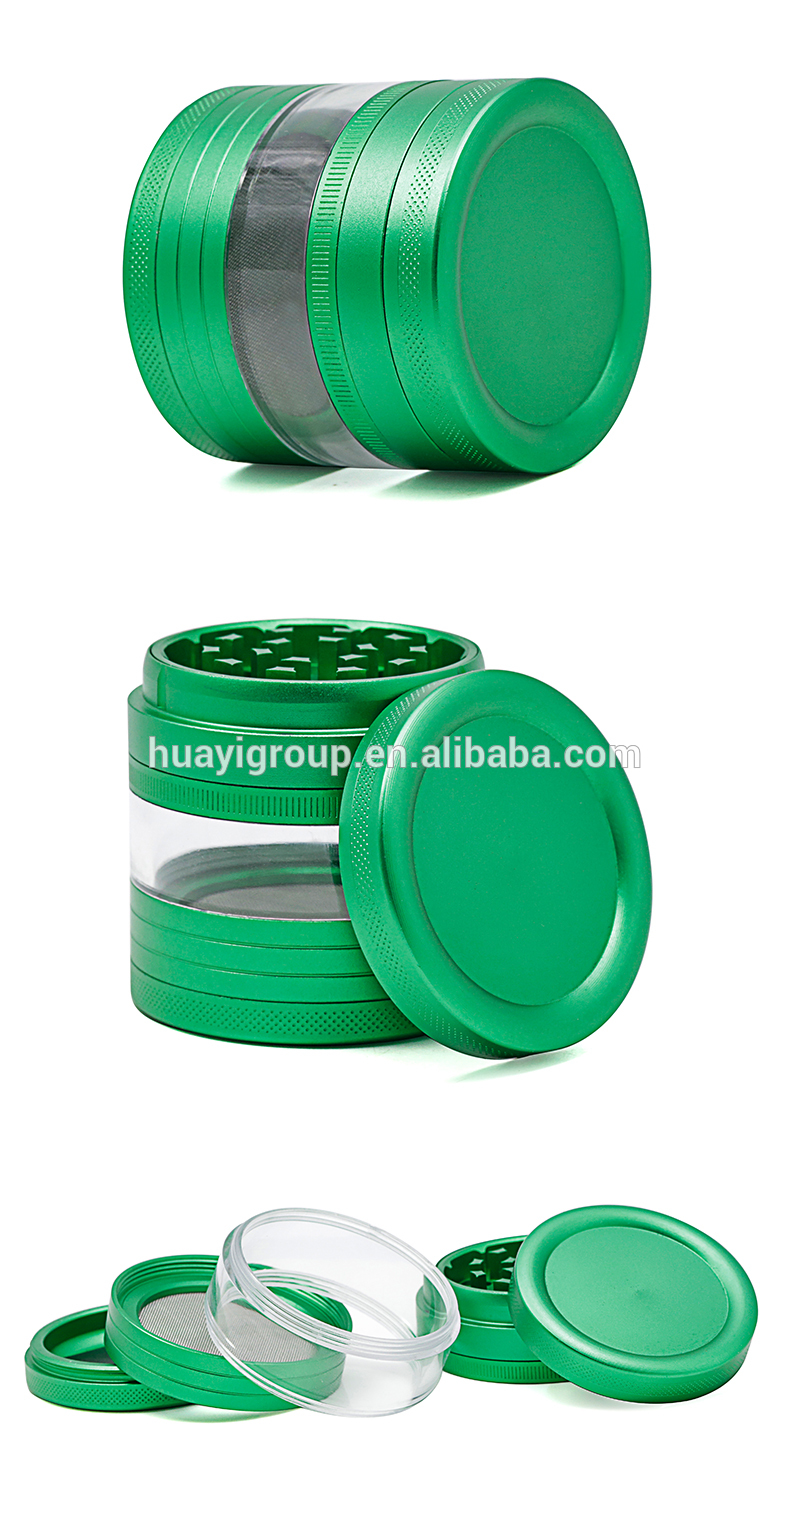 2019 New anodized grinder Aluminum weed herb grinder with transparent acry layer custom logo smoking accessories weed grinder